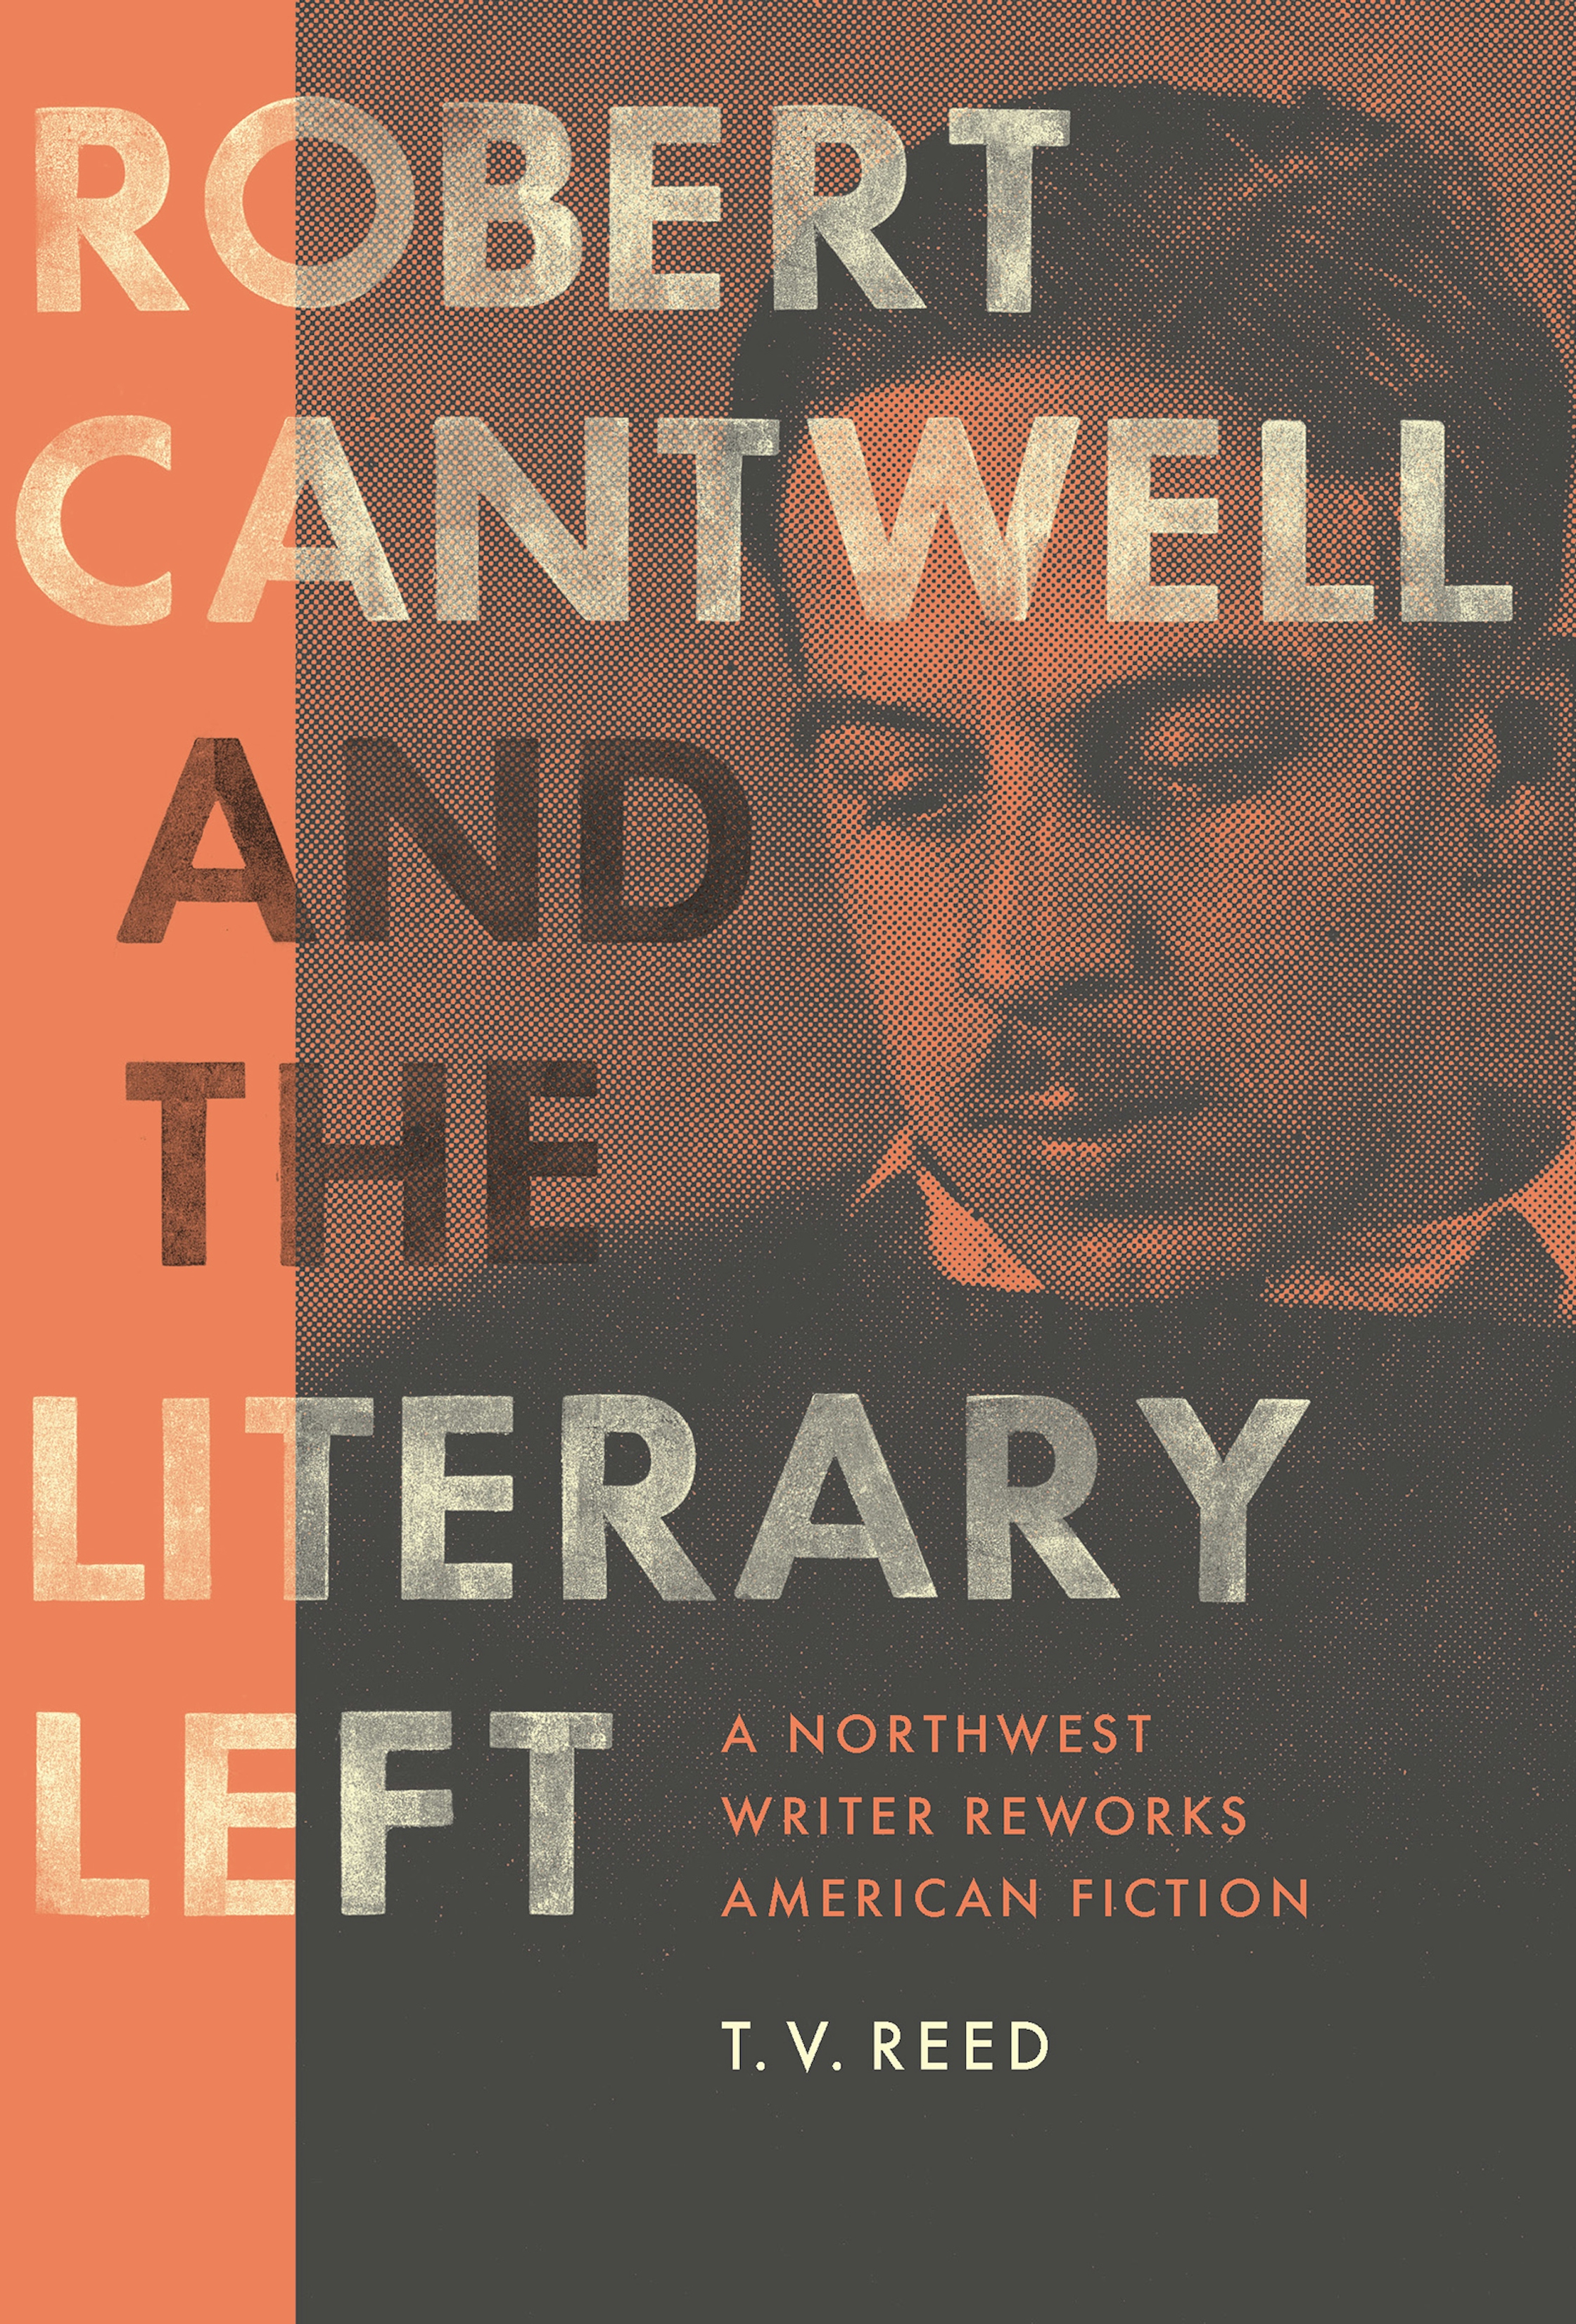 Robert Cantwell and the Literary Left